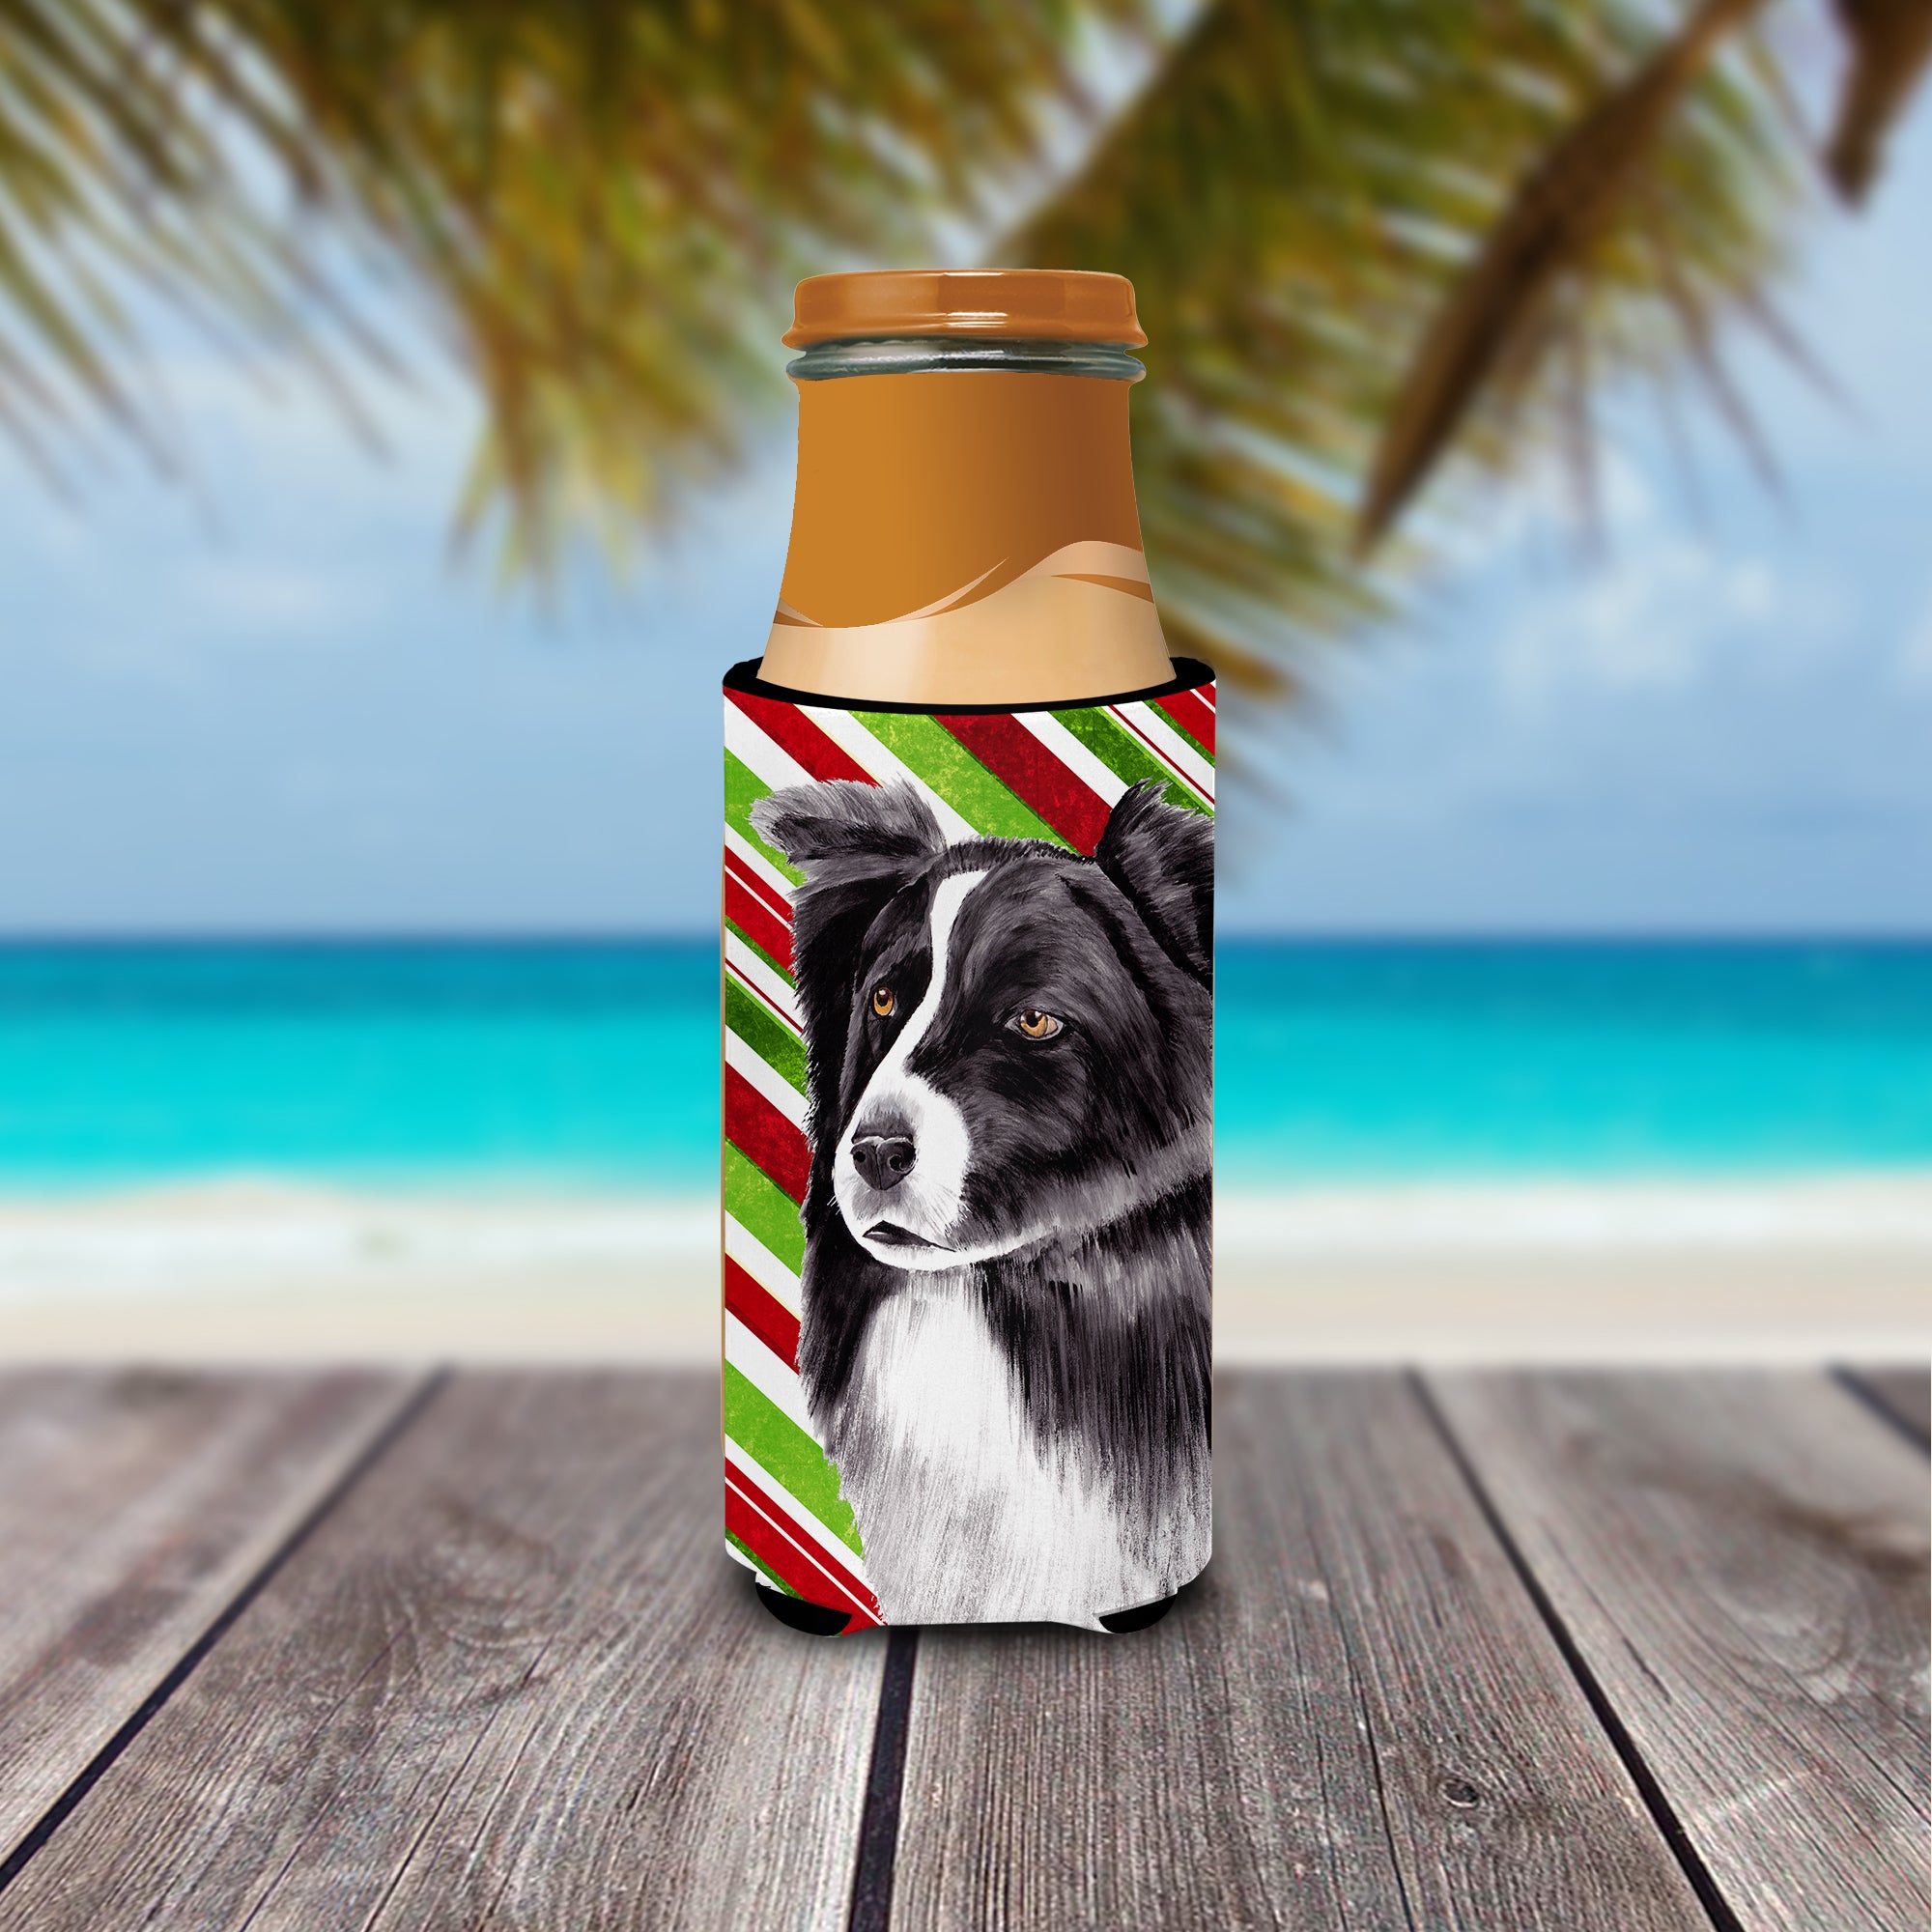 Border Collie Candy Cane Holiday Christmas Ultra Beverage Isolateurs pour canettes minces SC9327MUK